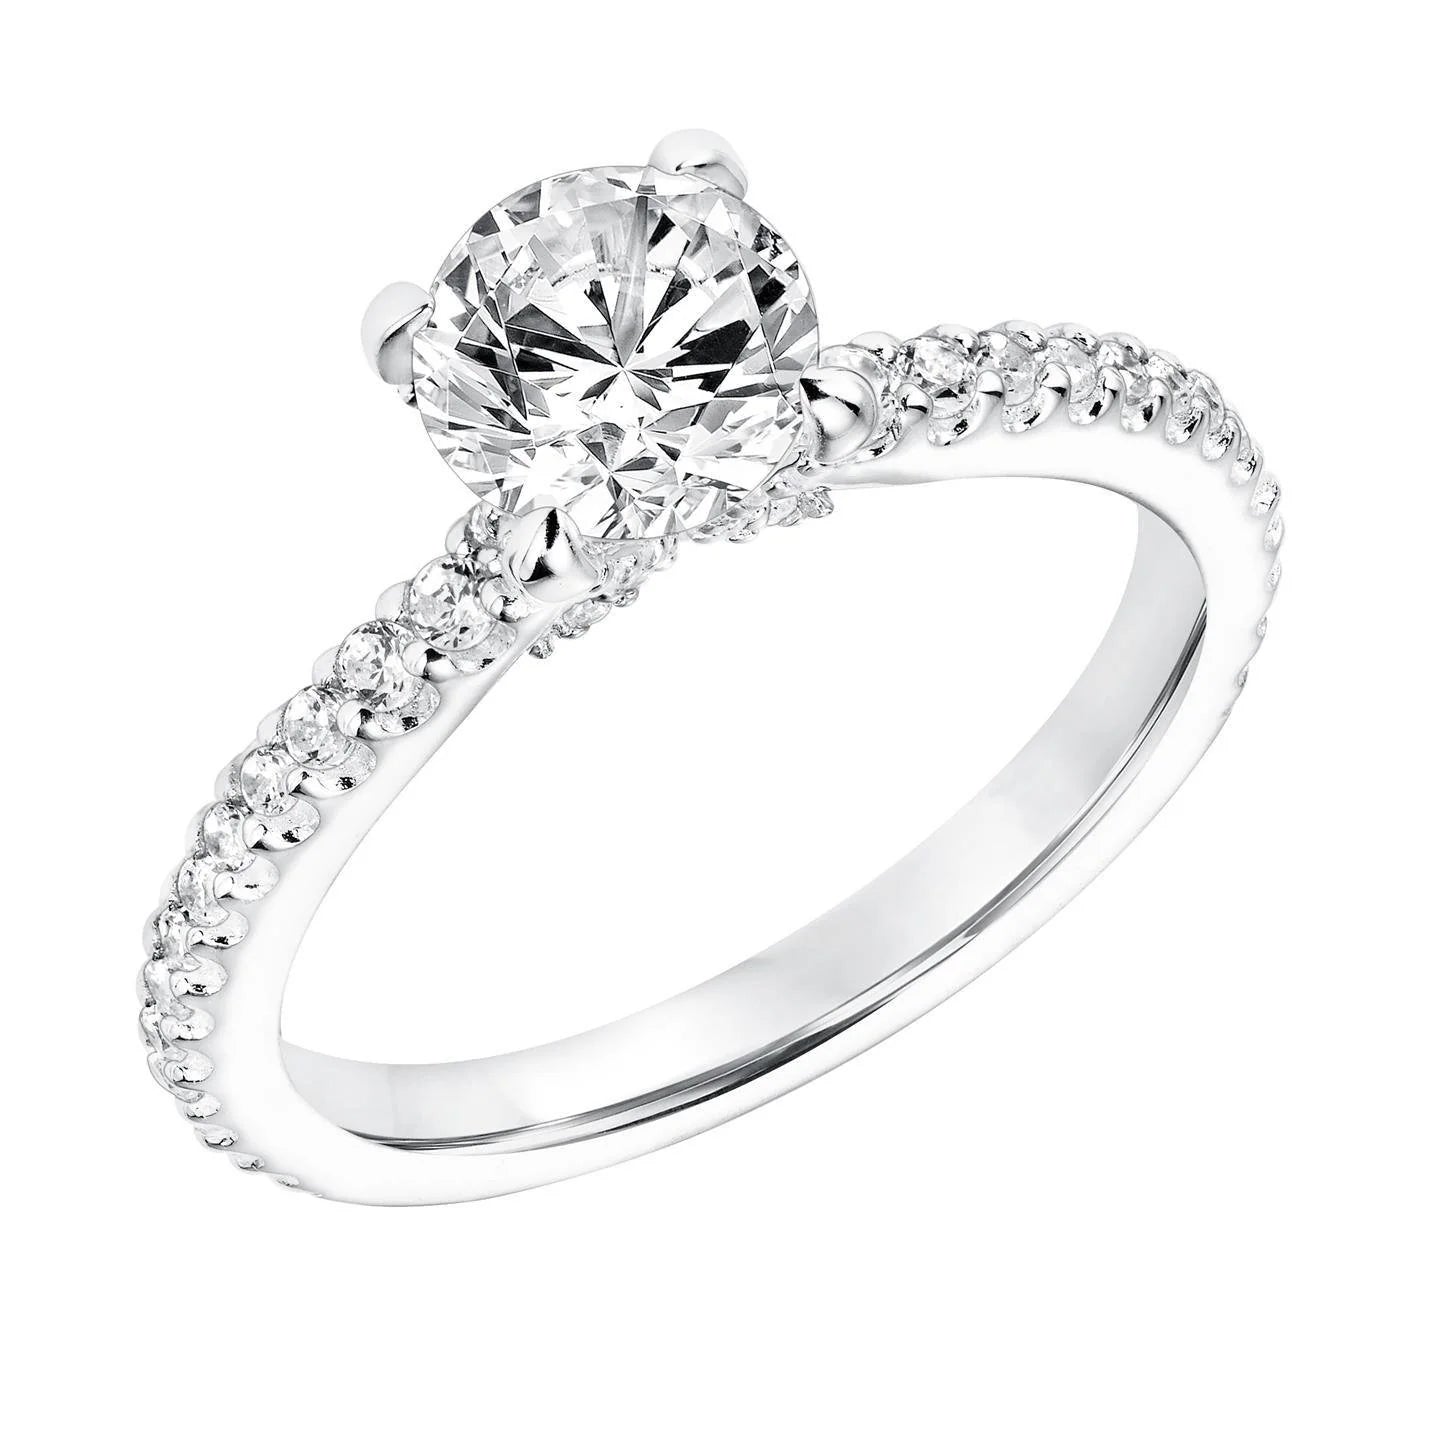 2.85 Carats Real Diamond Engagement Ring White Gold 14K